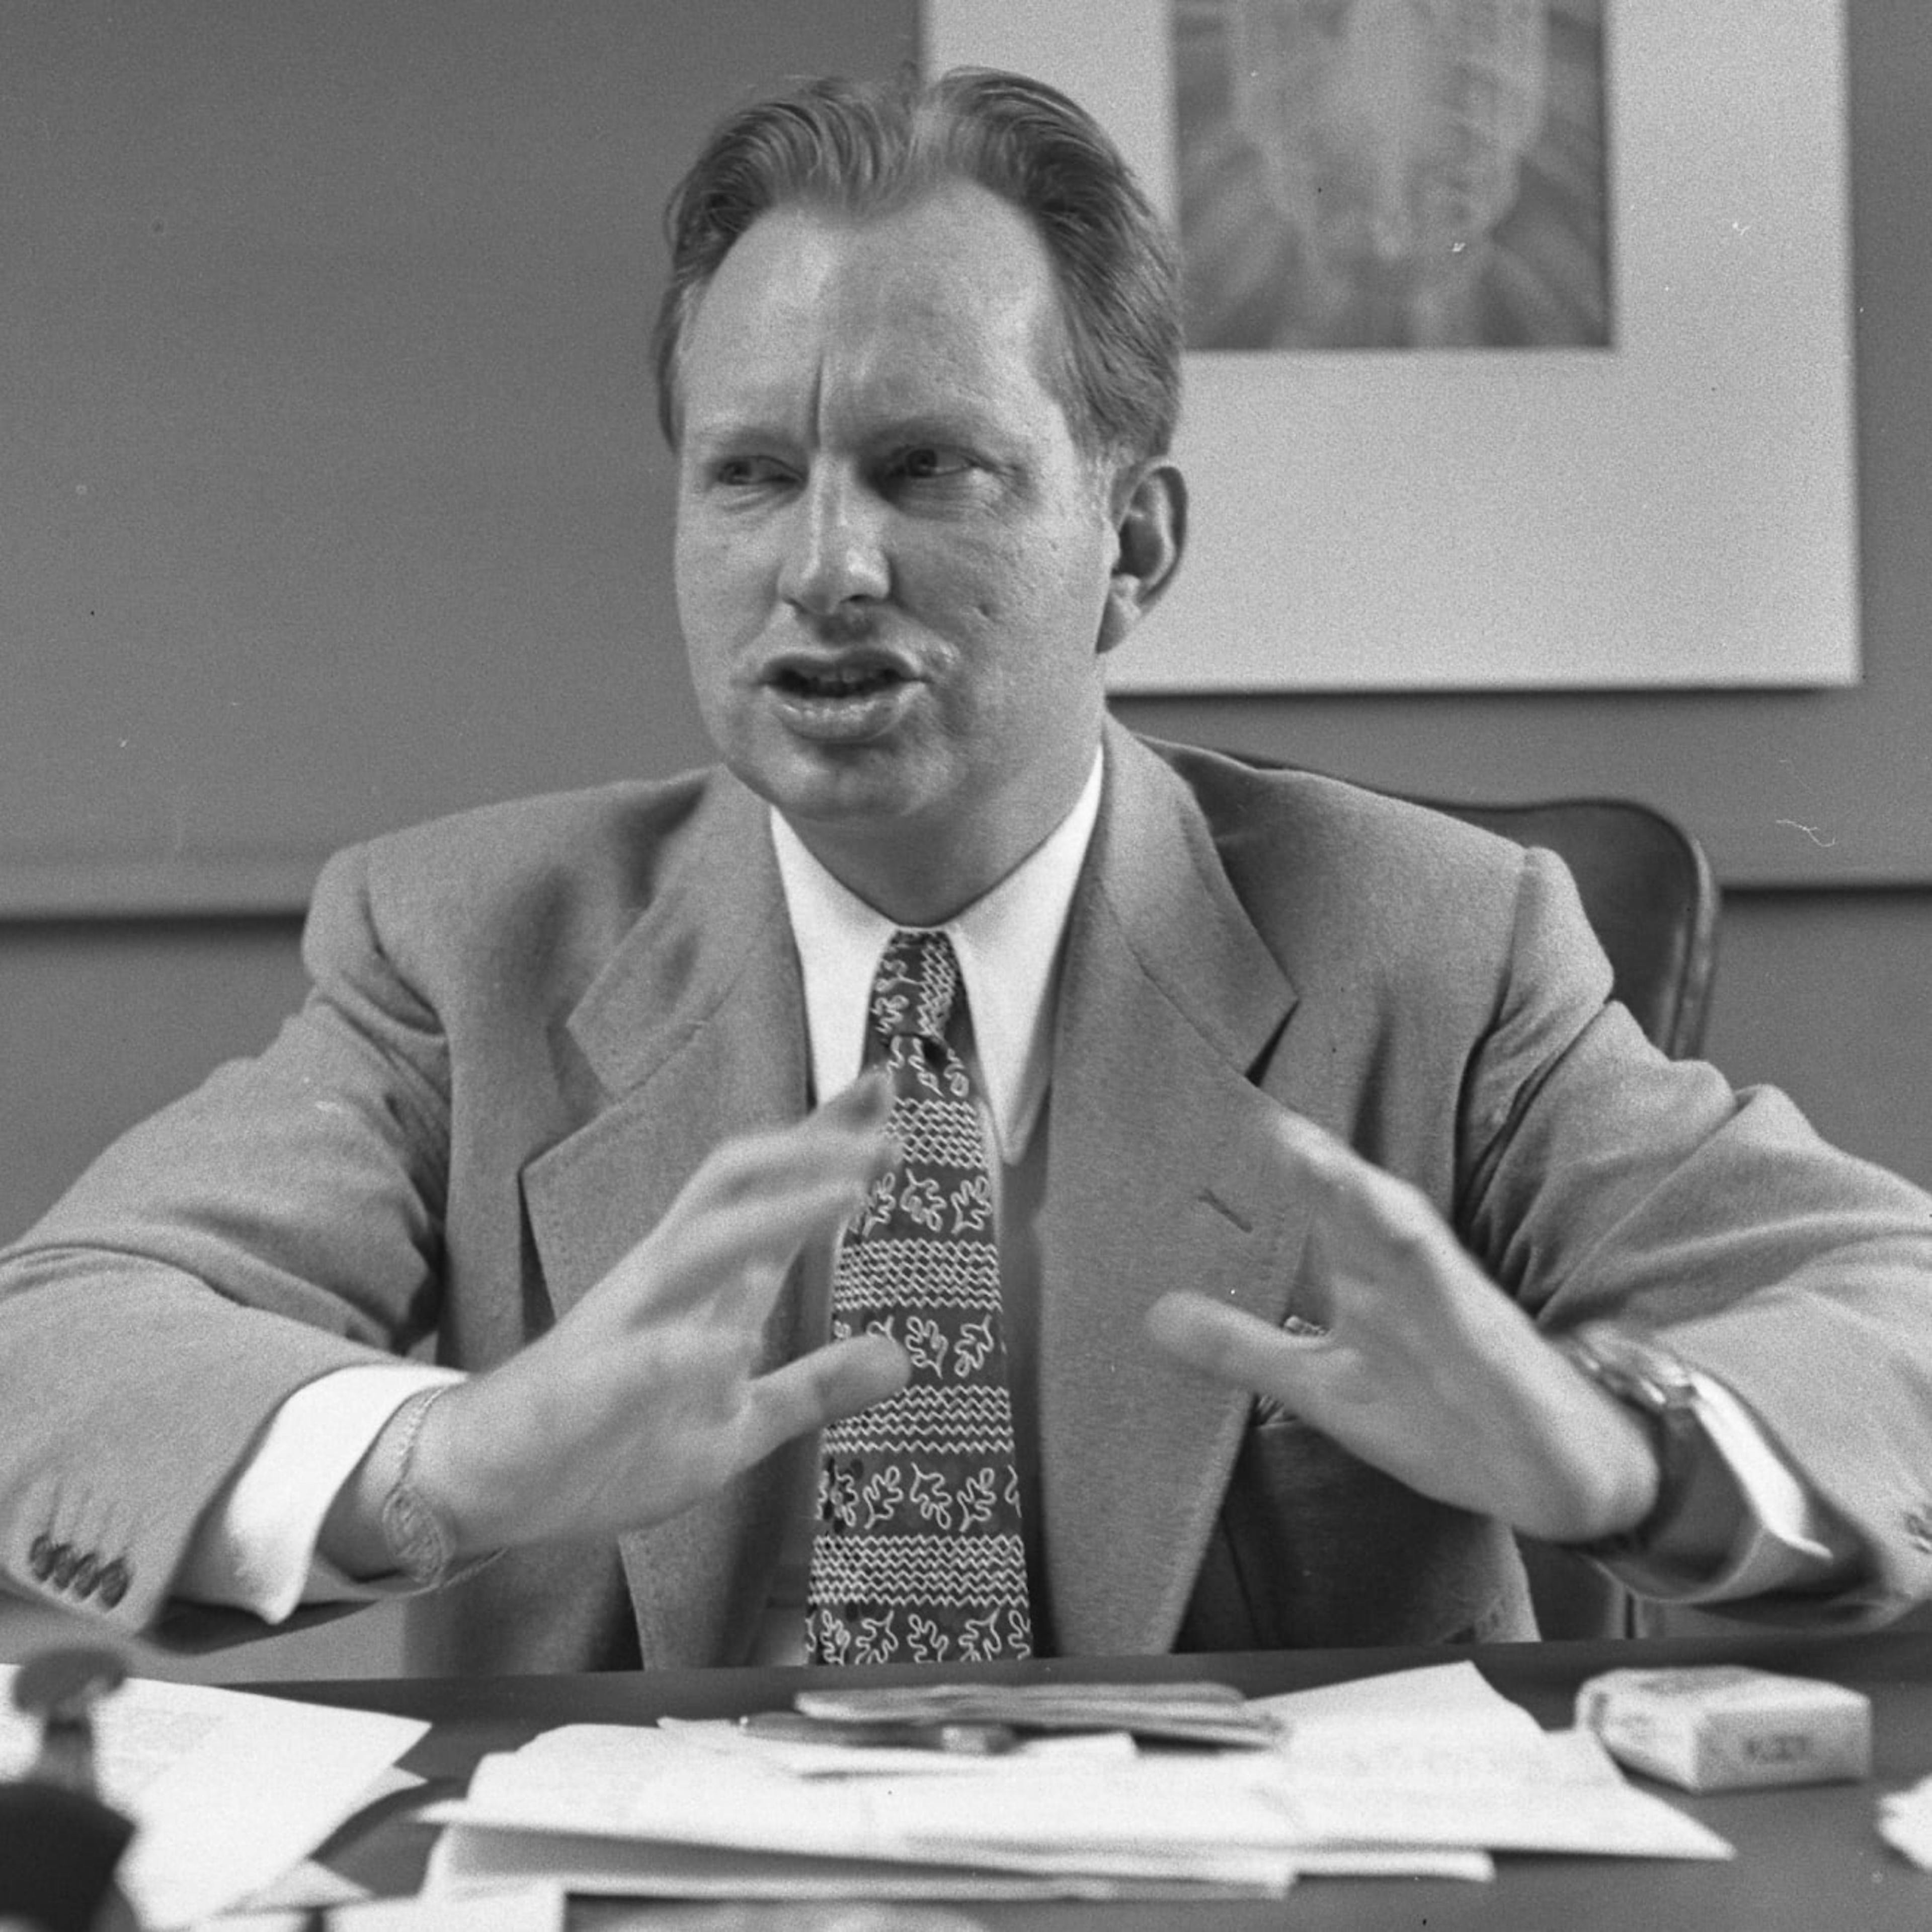 Founder of Scientology, L. Ron Hubbard